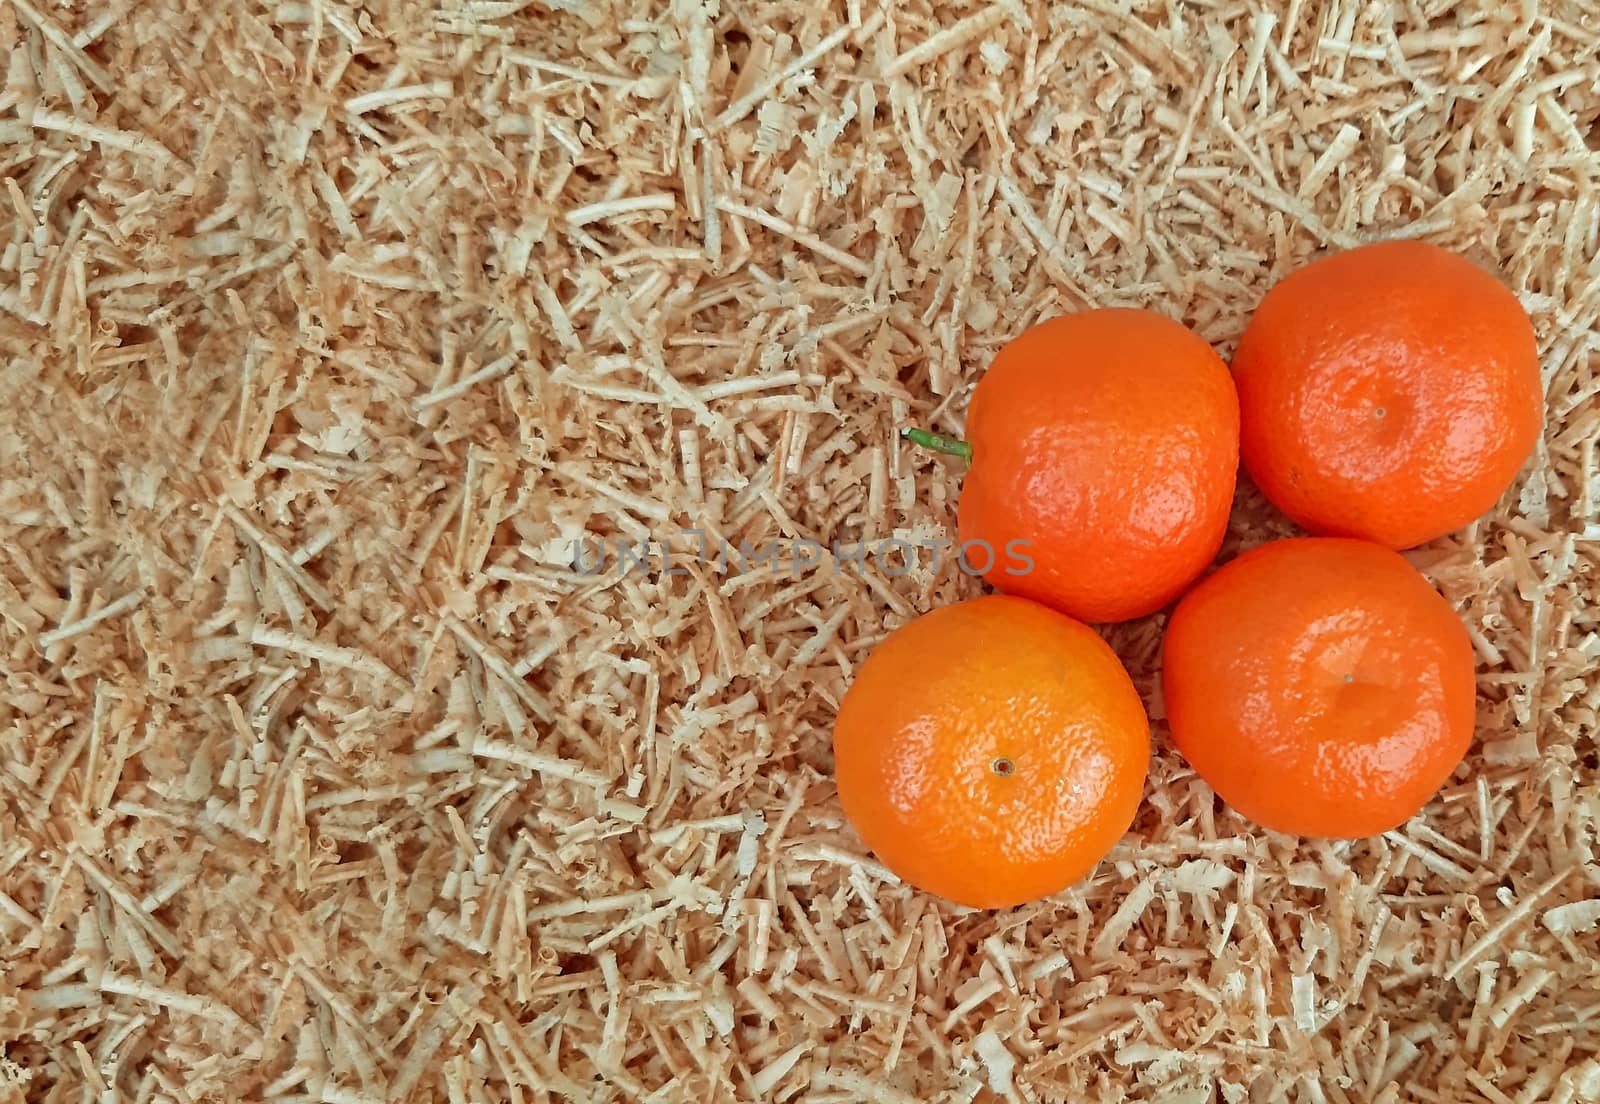 Clementines on a background of sawdust